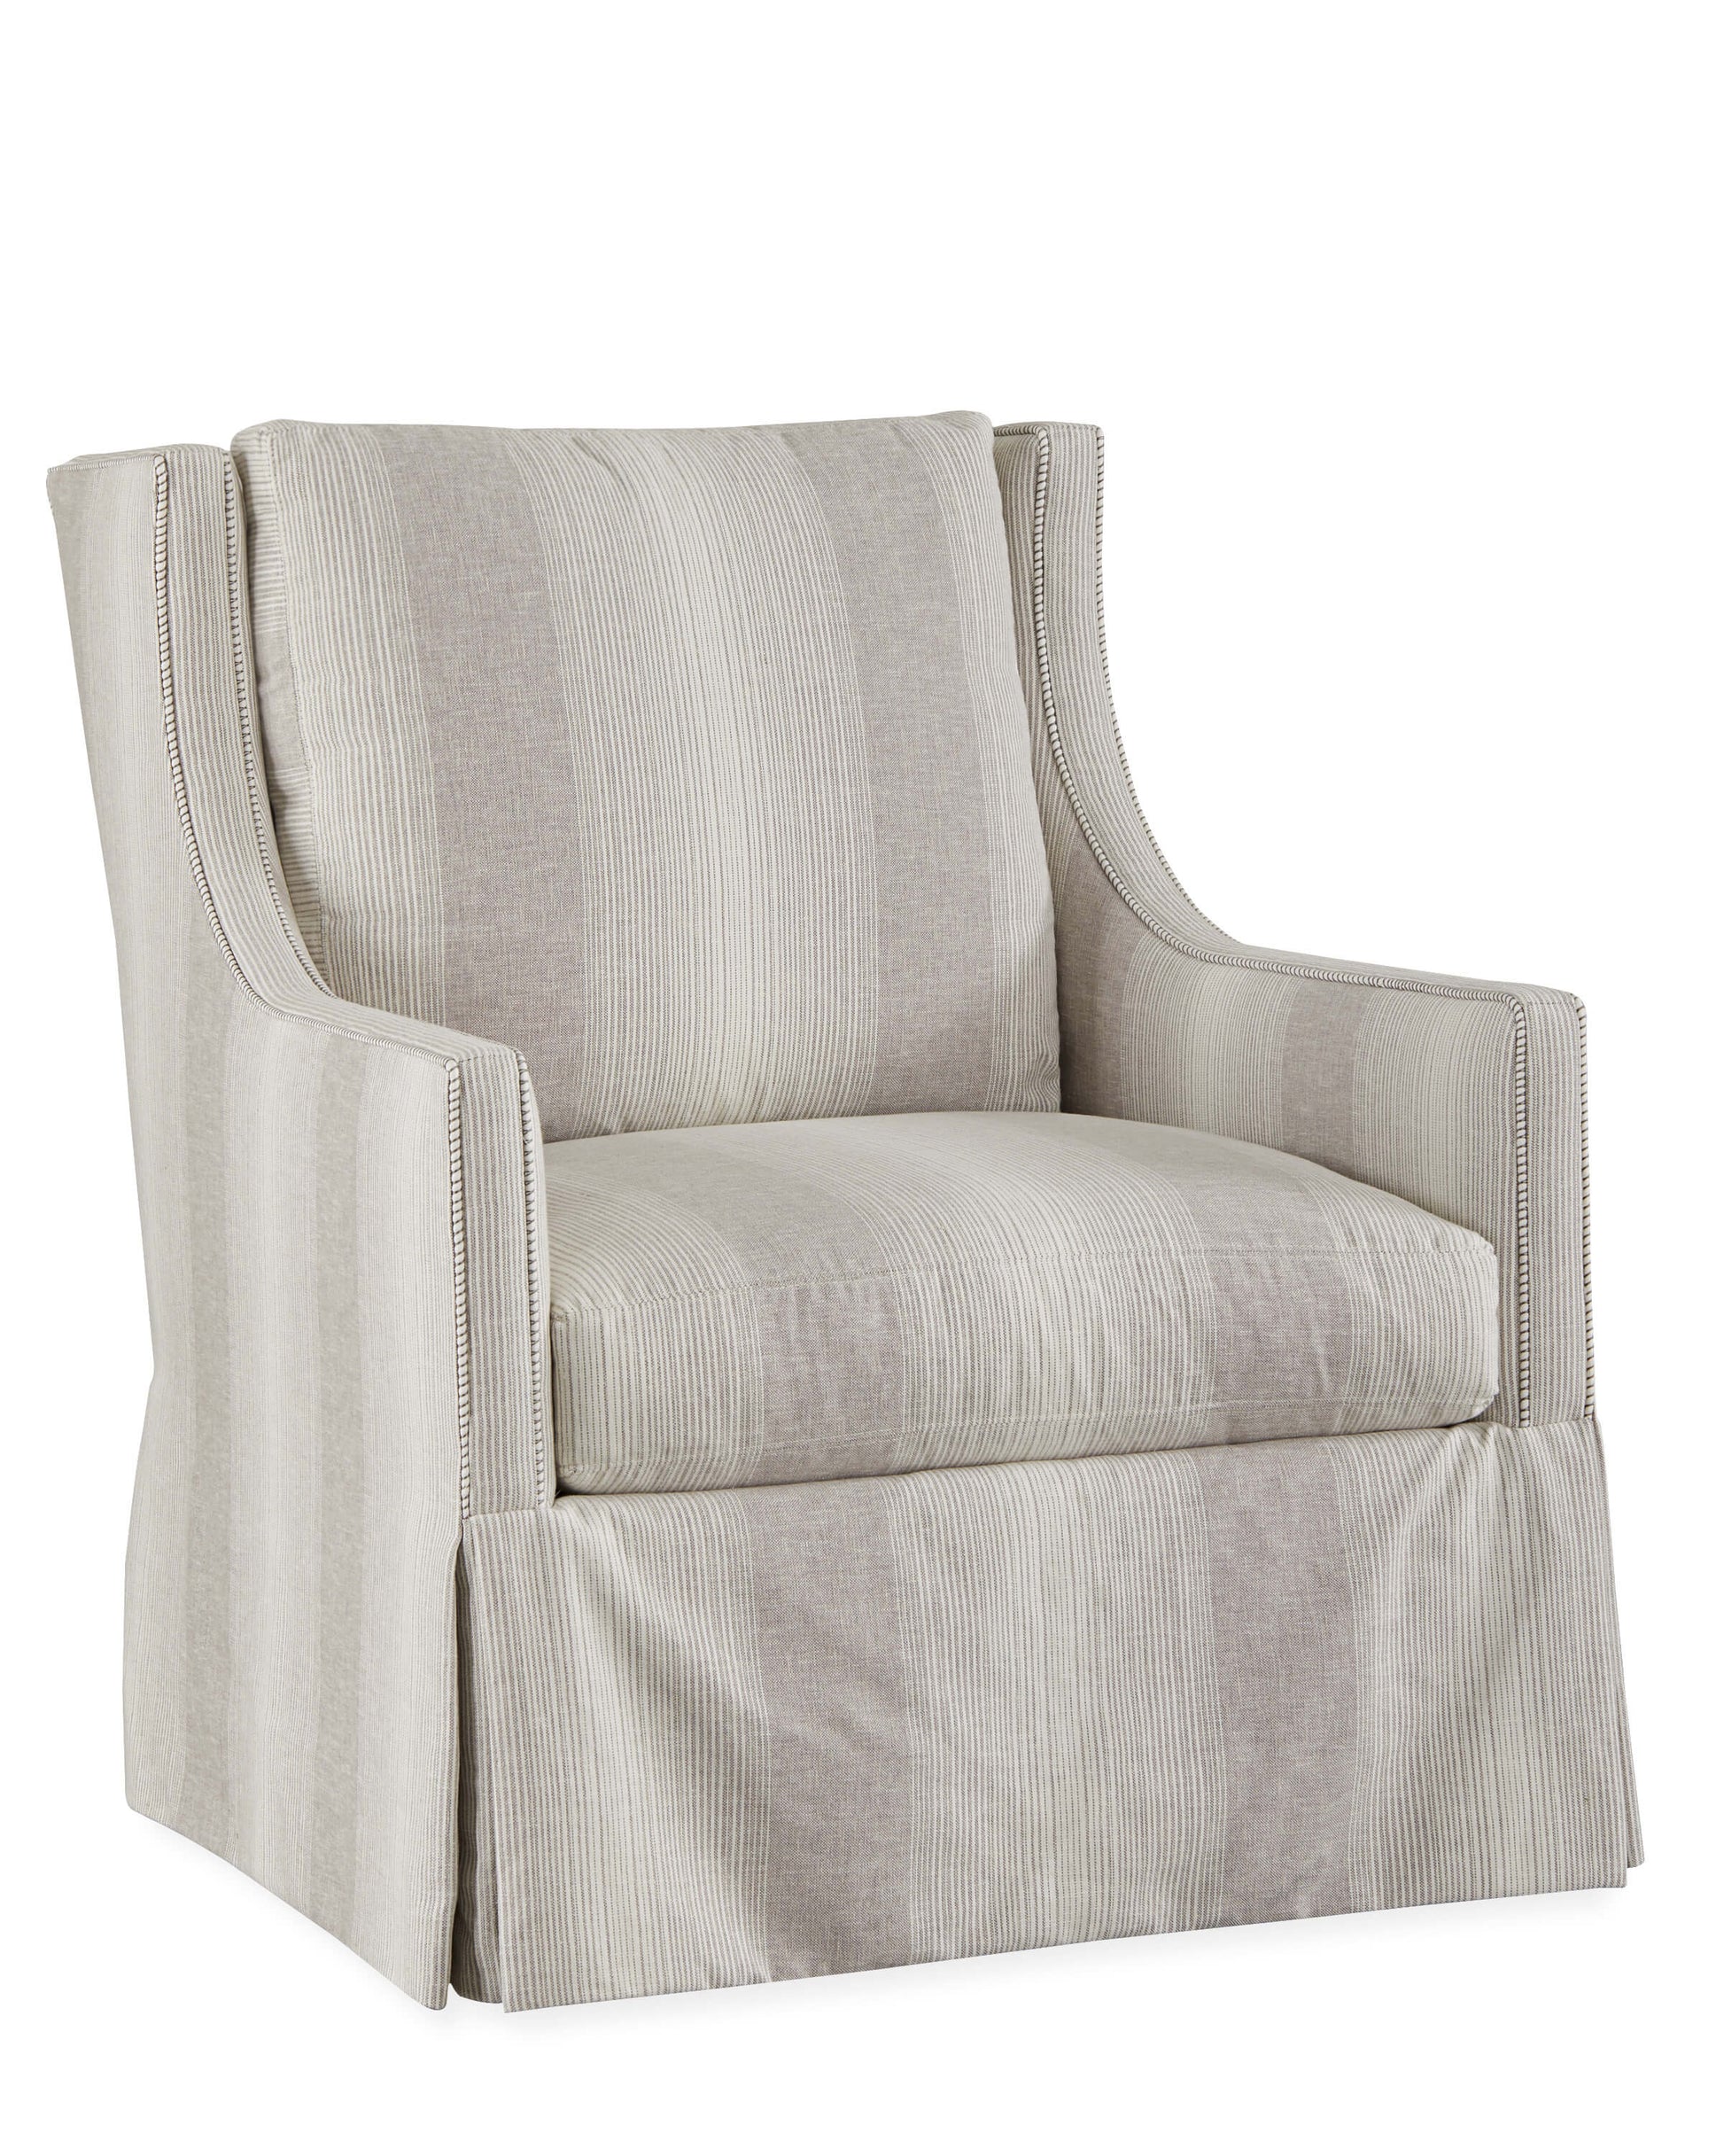 Lee Industries 1211-01SW Chair in a gray and white stripped fabric with english arm. 